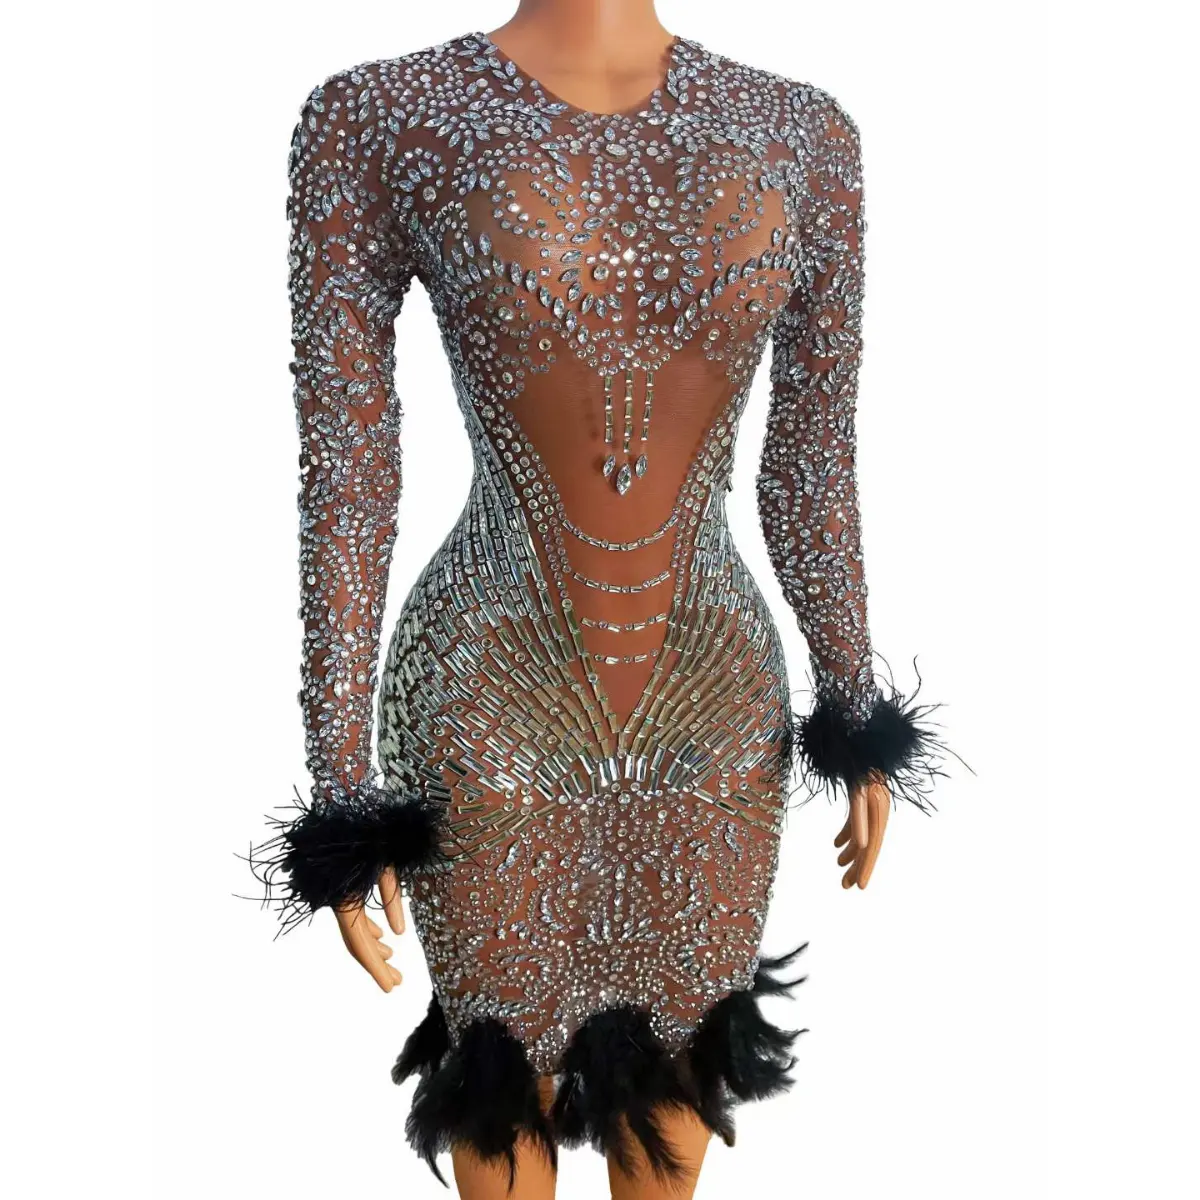 Luxury Design Ladies Long Sleeve Black Feather Woman Performance Ballroom Dress Sparkly Diamond Evening Dresses With Feathers